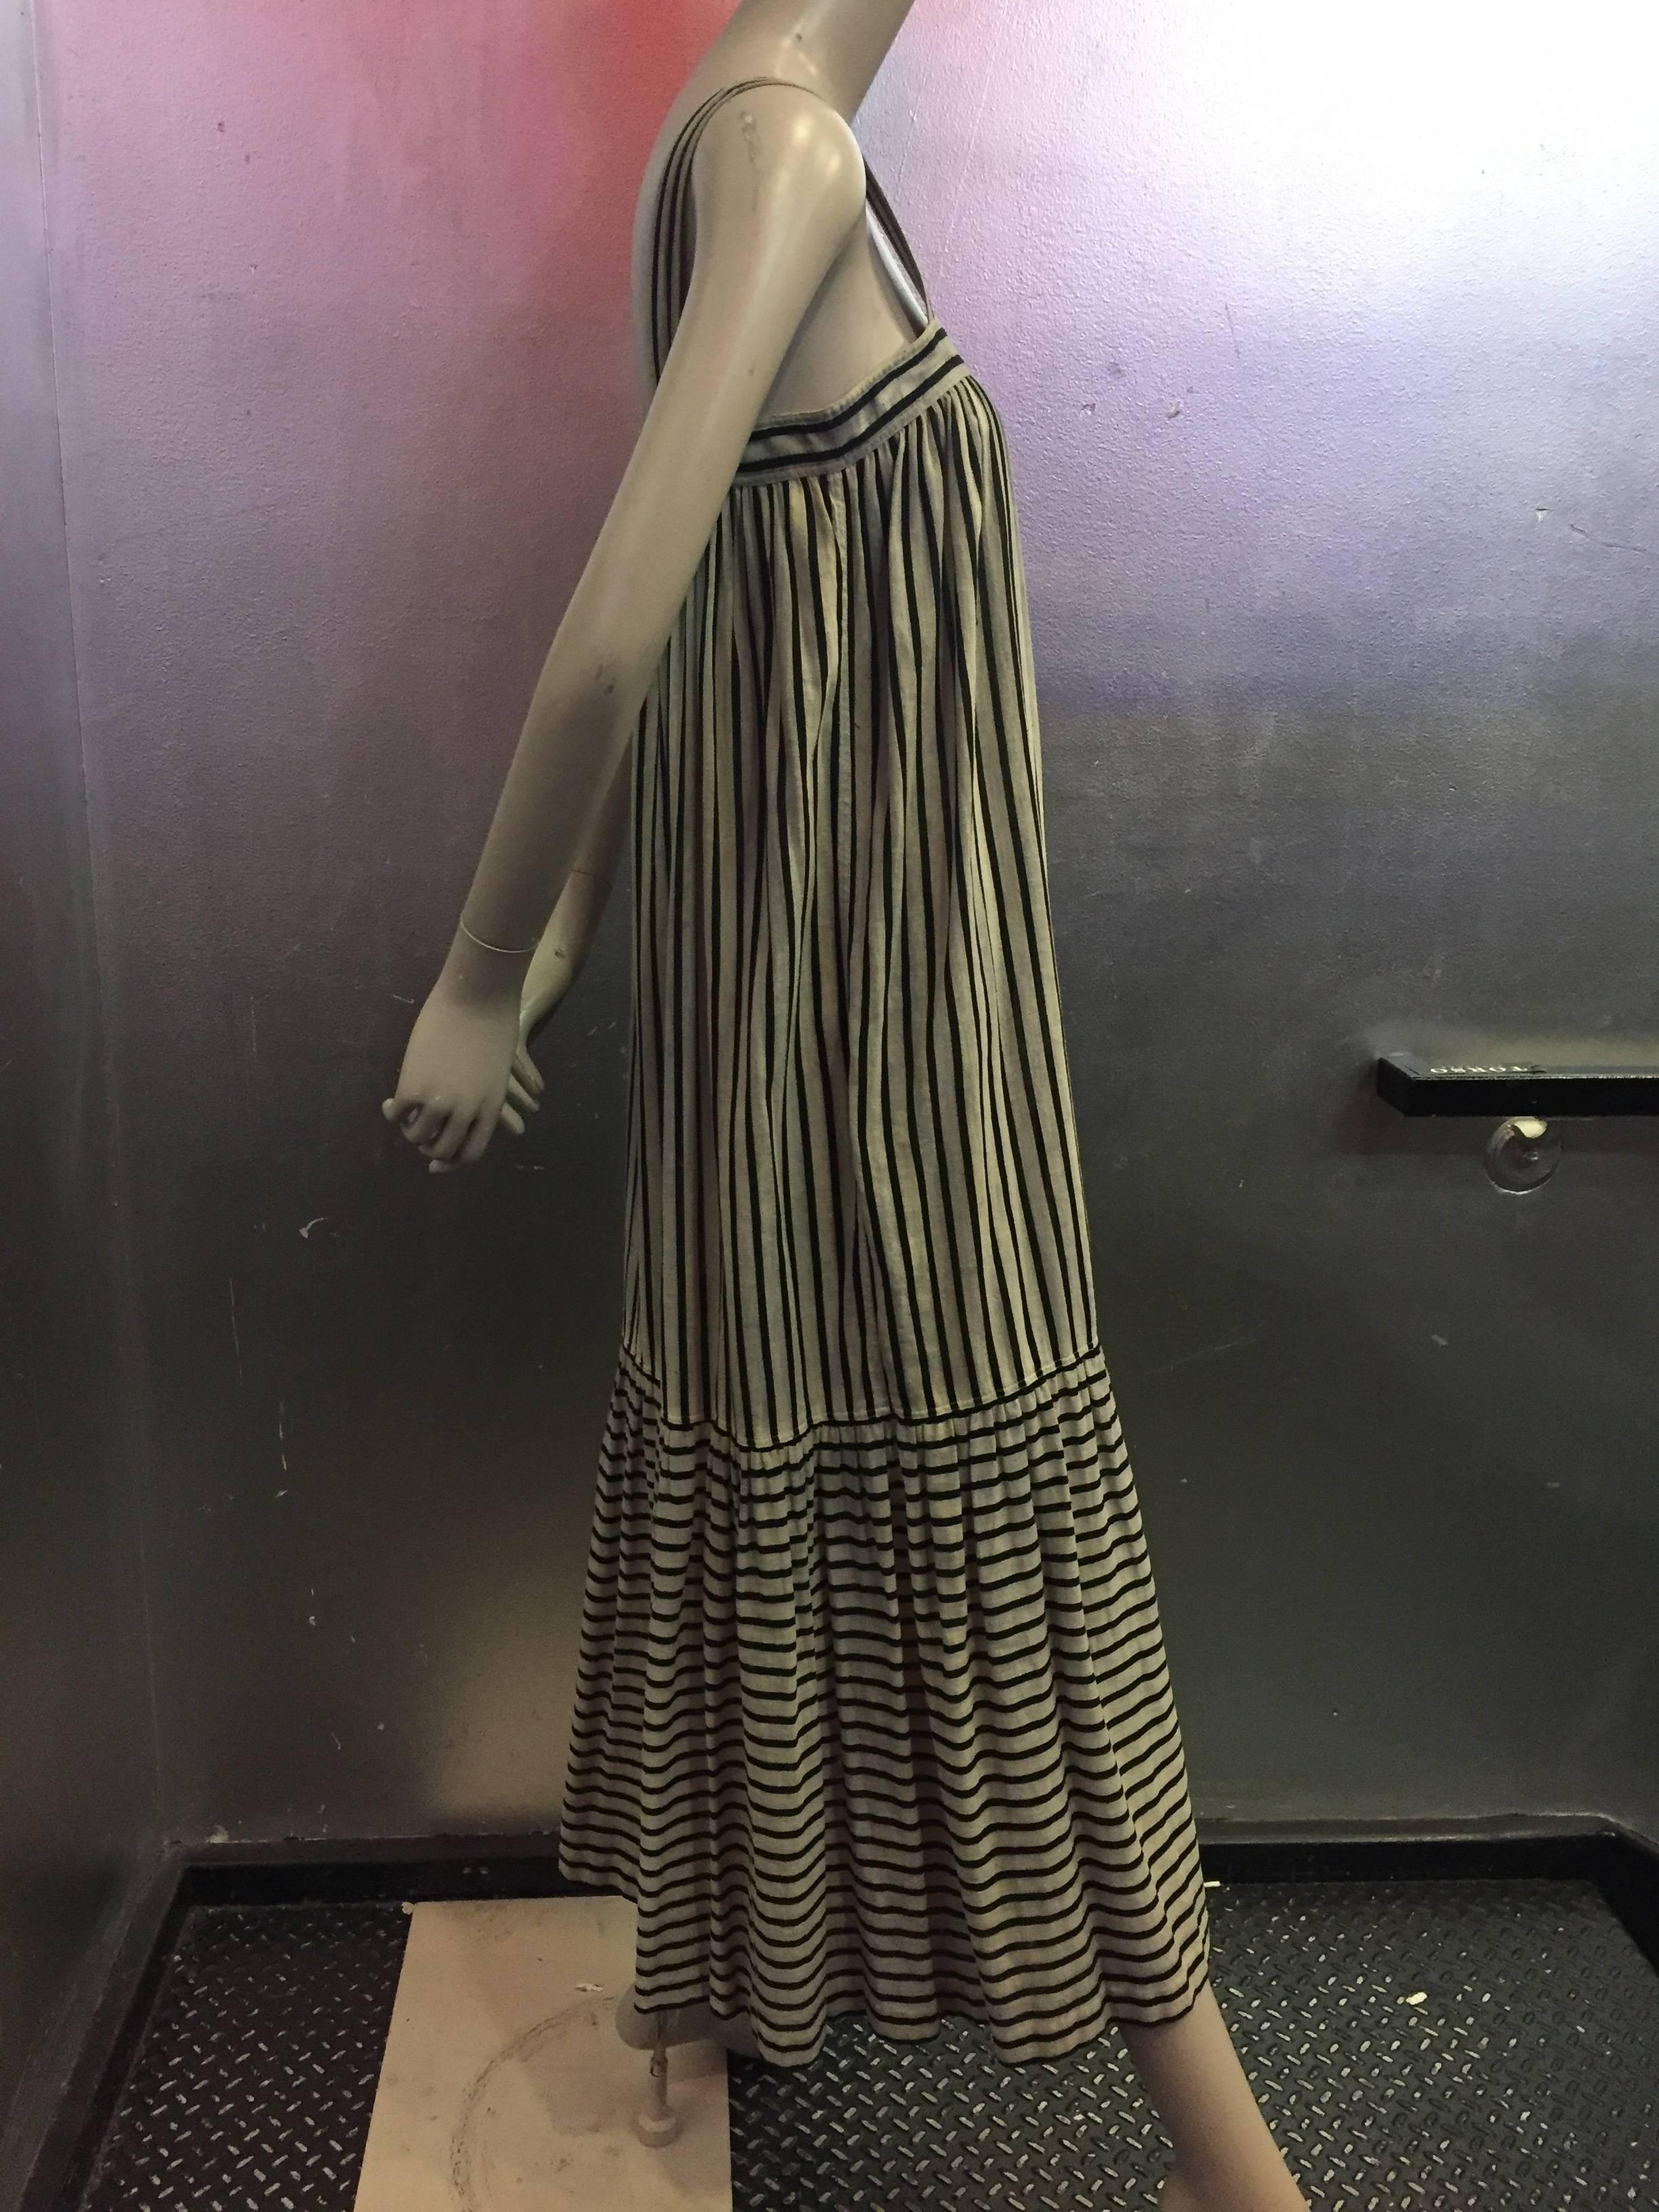 A fantastic woven cotton Saint Laurent dress for warmer weather. Made of parchment colored and black stripes, this is a great dress for belts and espadrilles. 


Measures 32 inches across the top of the bust, with the rest of the dress open. Length